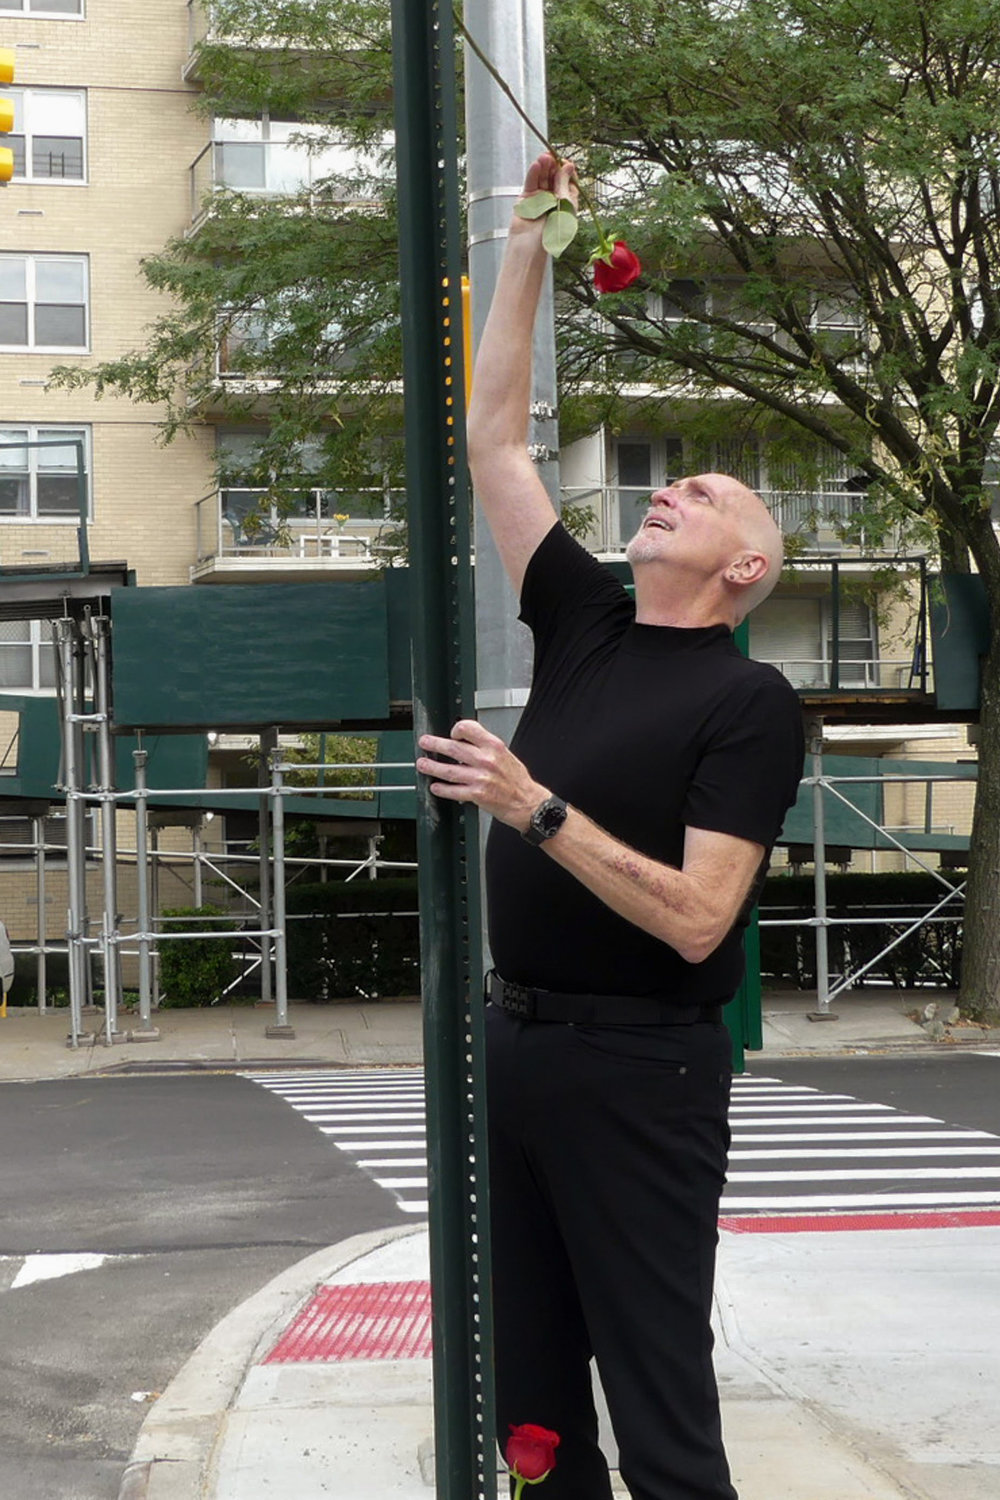 Jim Bradley places a rose in memory of Ruth Mullen at the corner of Johnson and Kappock in Riverdale, NY on Septmeber 4, 2022.